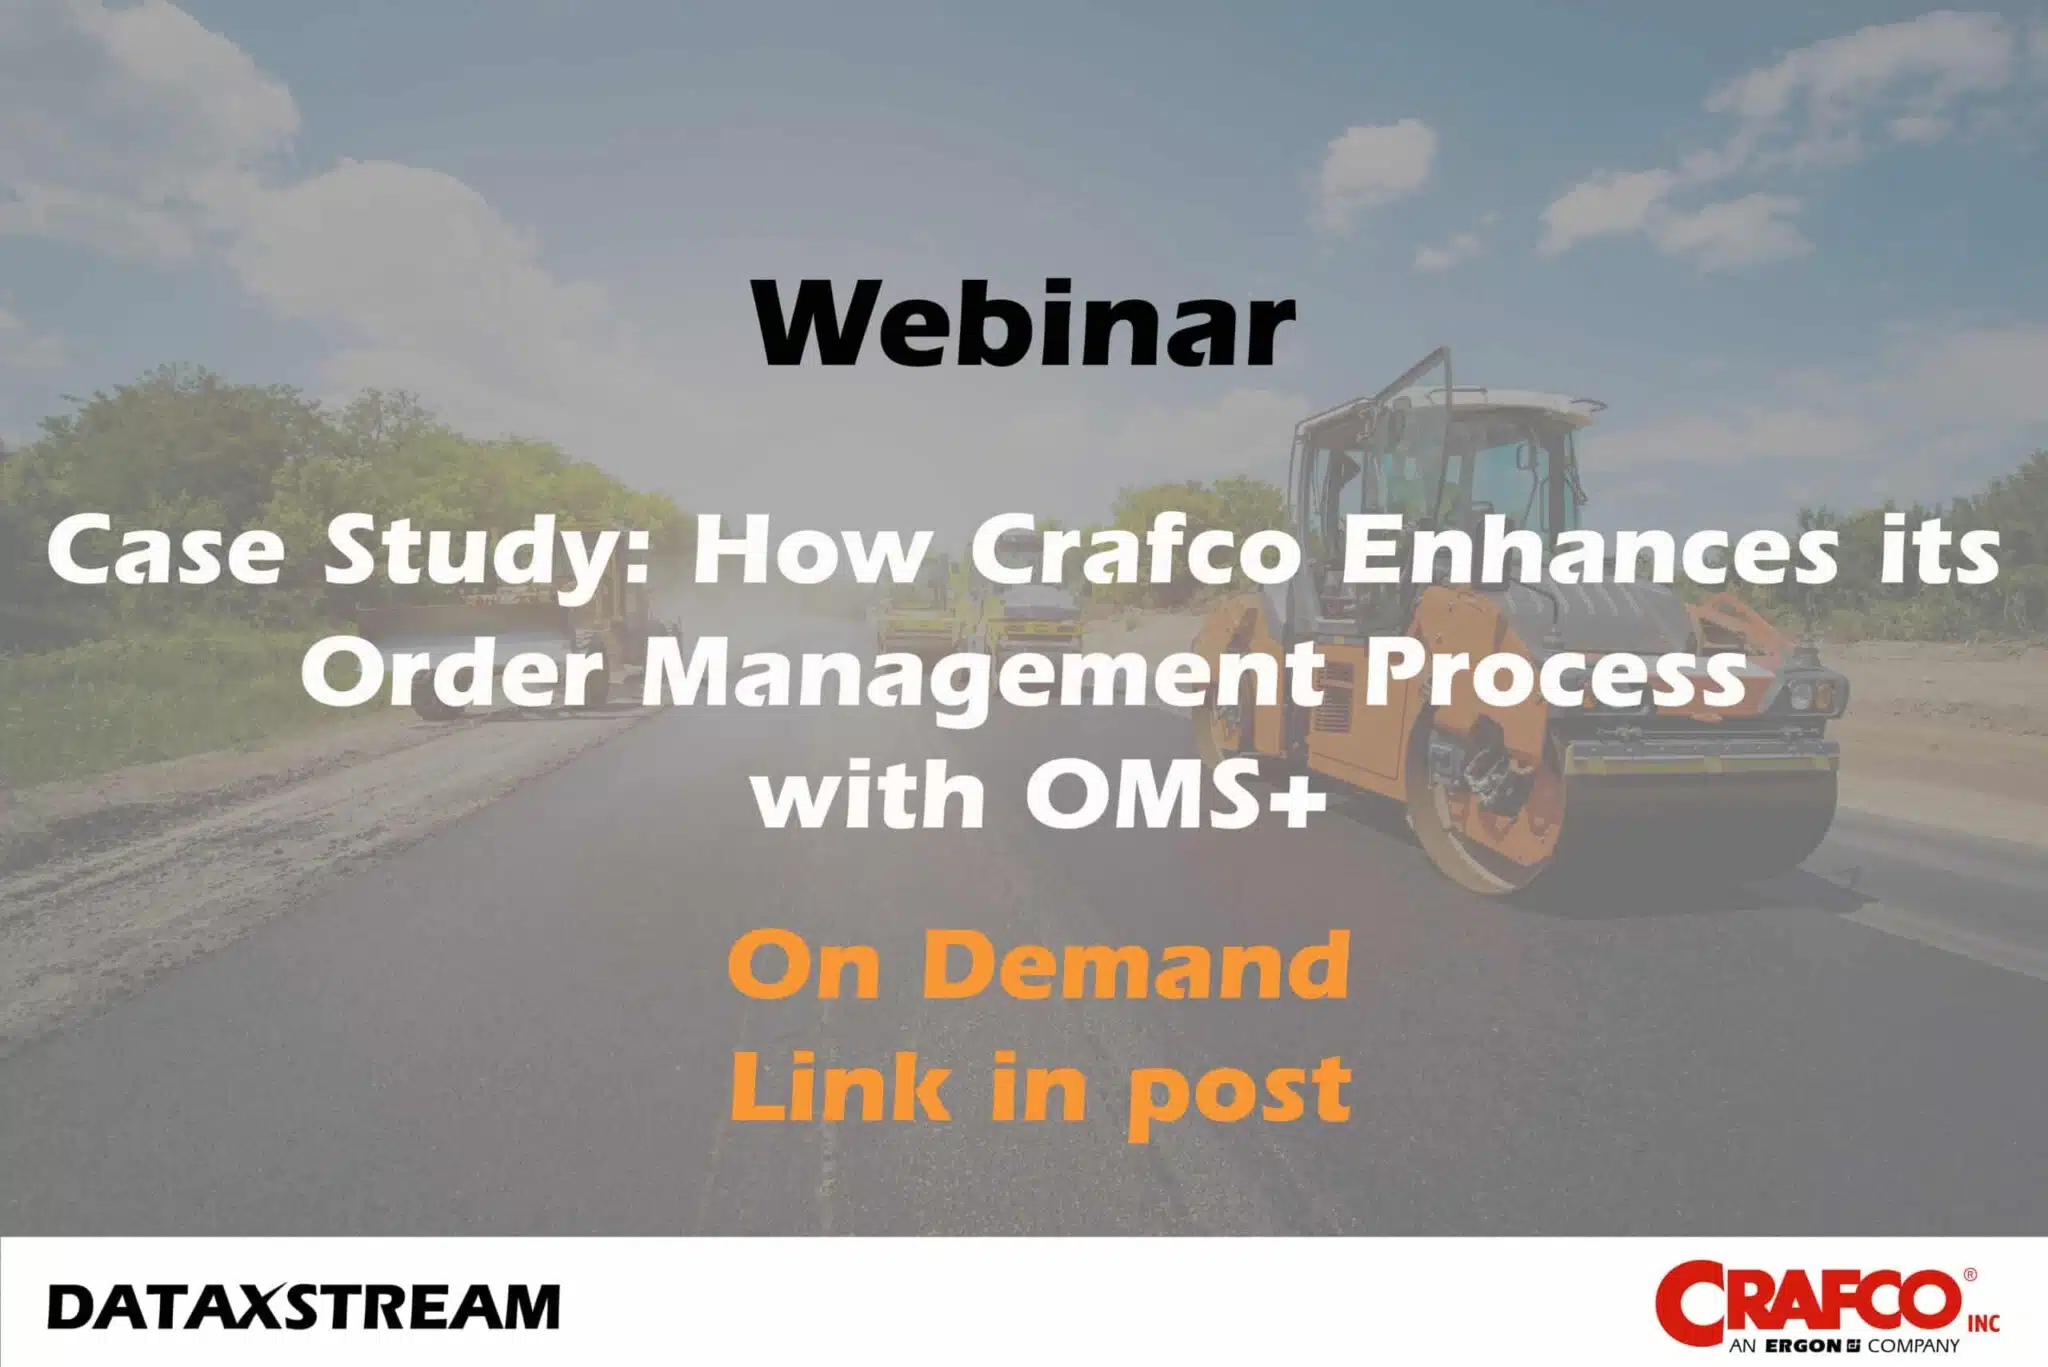 on demand: case study, how crafco enhances its order management process with OMS+